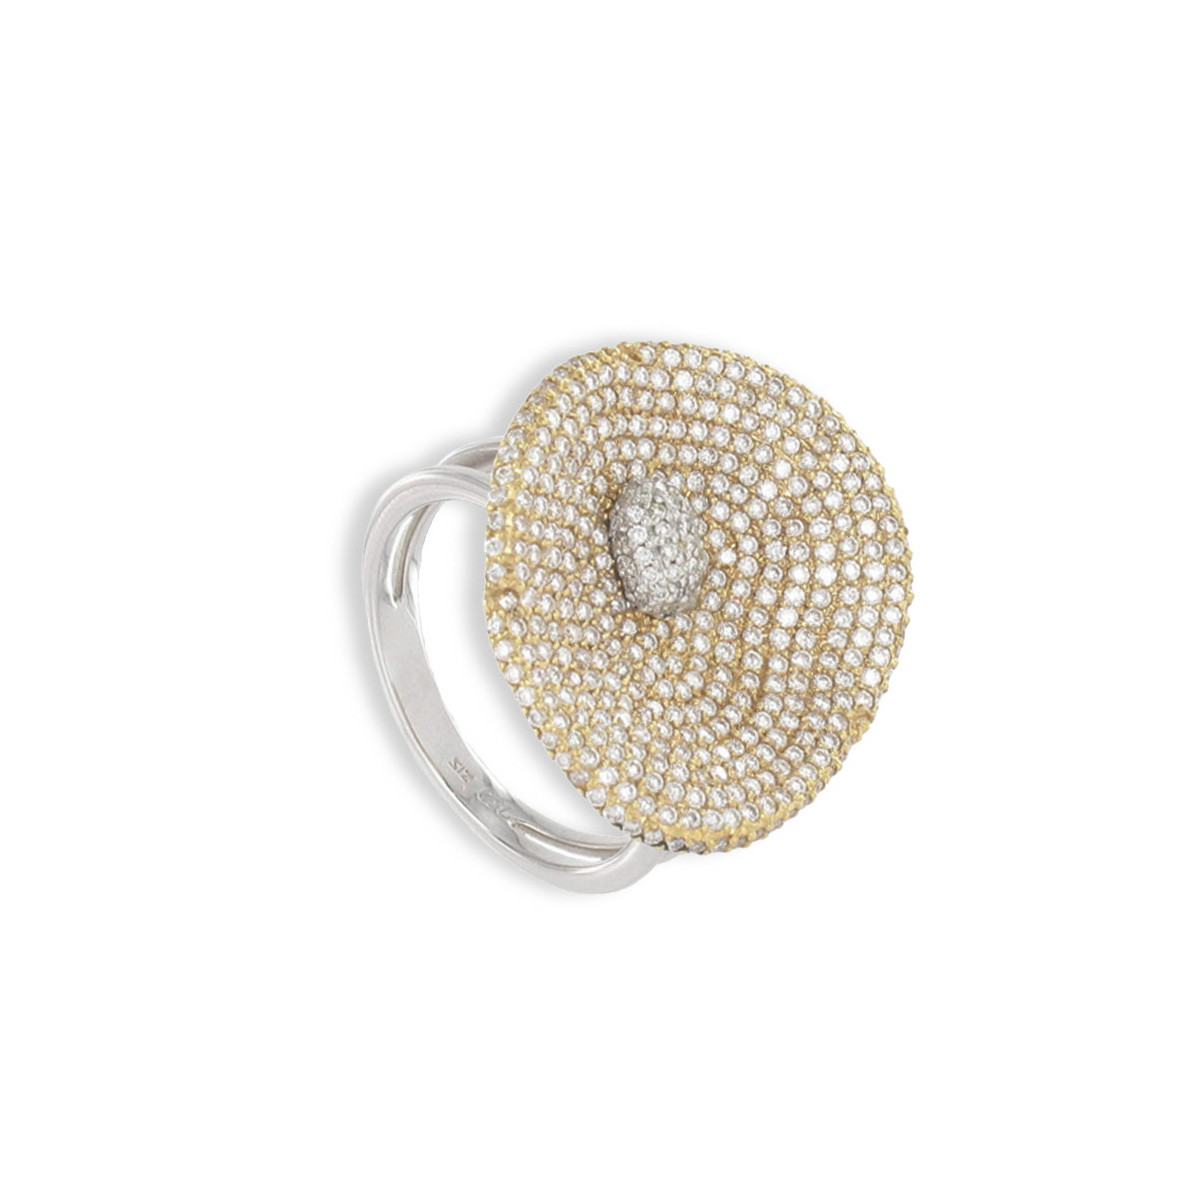 TWO GOLD AND DIAMOND PAVE RING